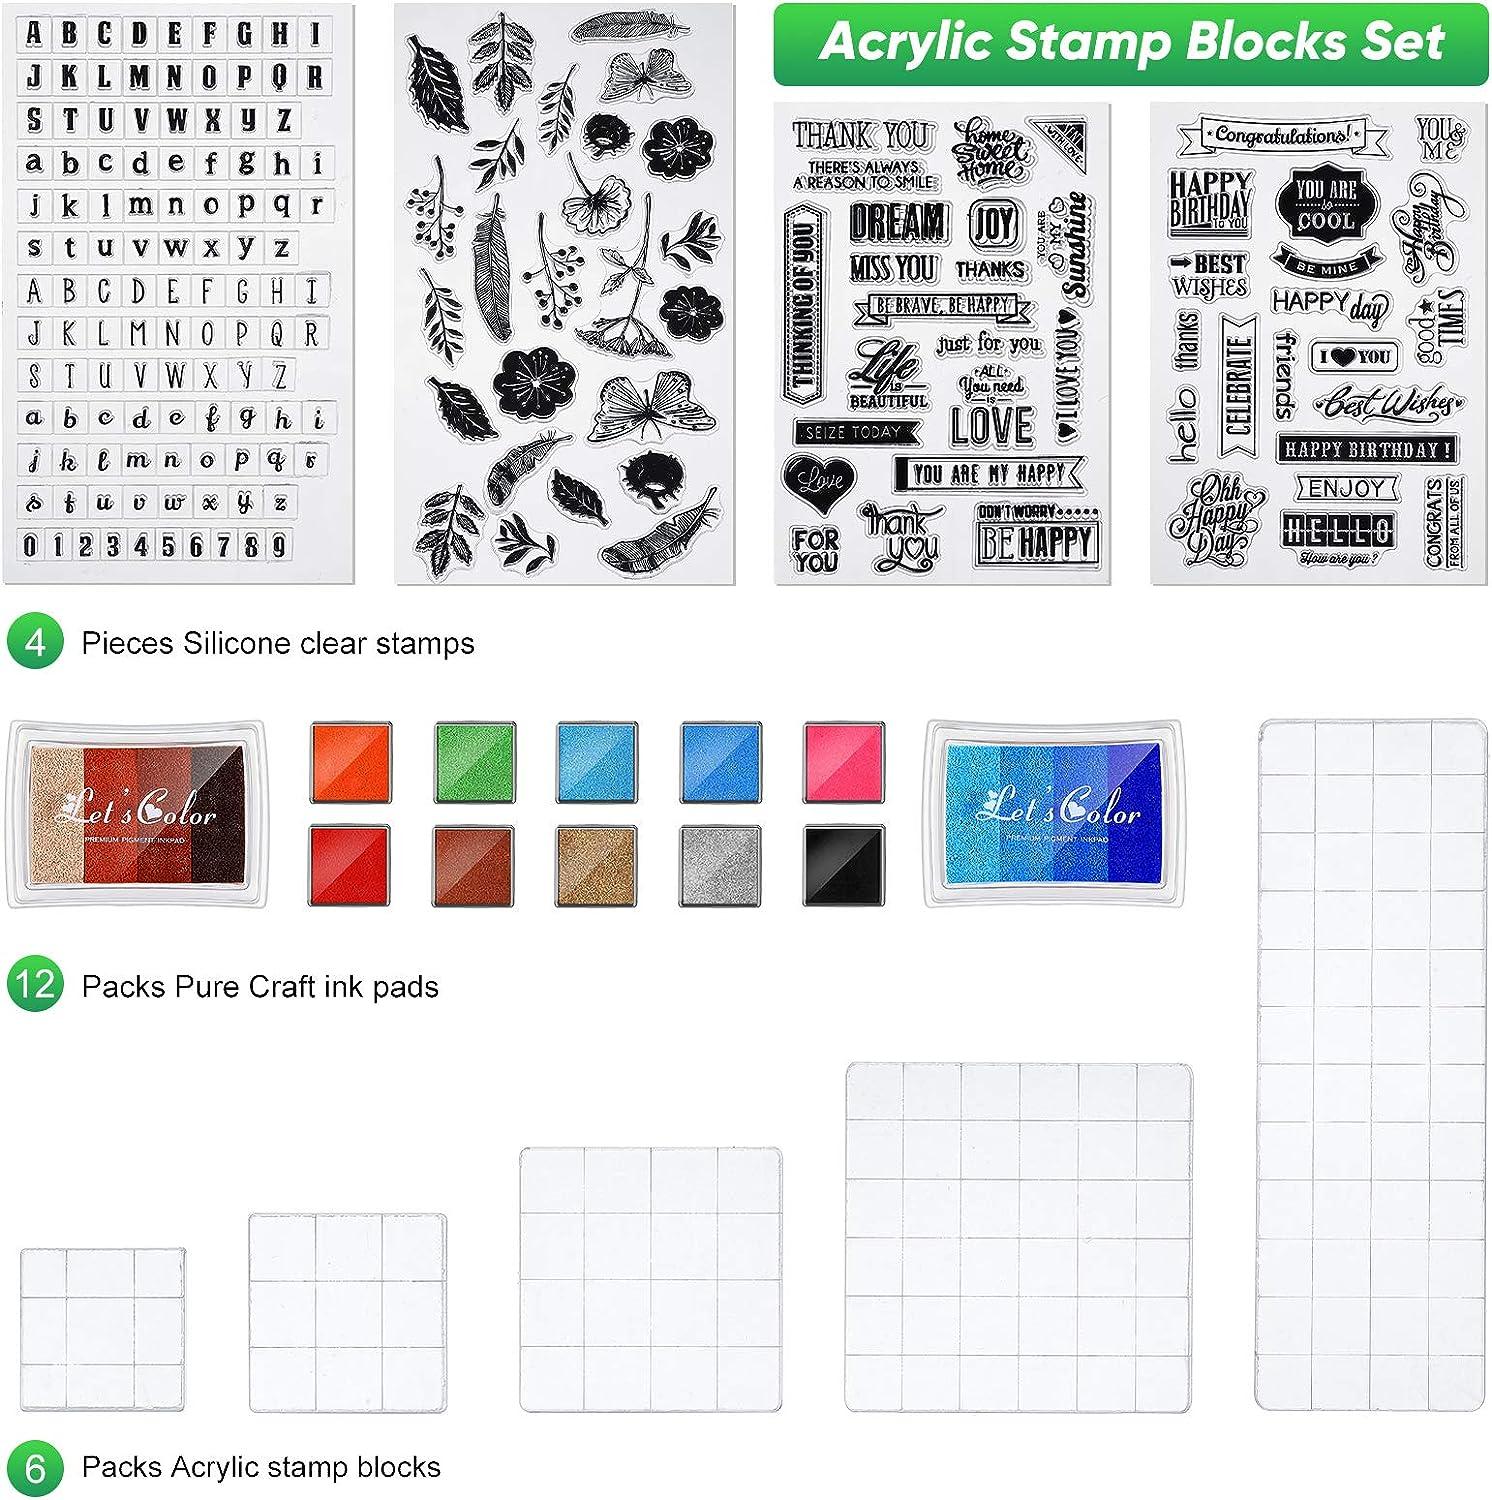 22 Pieces Acrylic Stamp Blocks Tools Set Include 6 Stamp Blocks Acrylic  Stamping Clear Block, 4 Transparent Silicone Clear Stamps Seal, 12 Craft  Ink Pad Stamp Pad for Scrapbooking Card Making